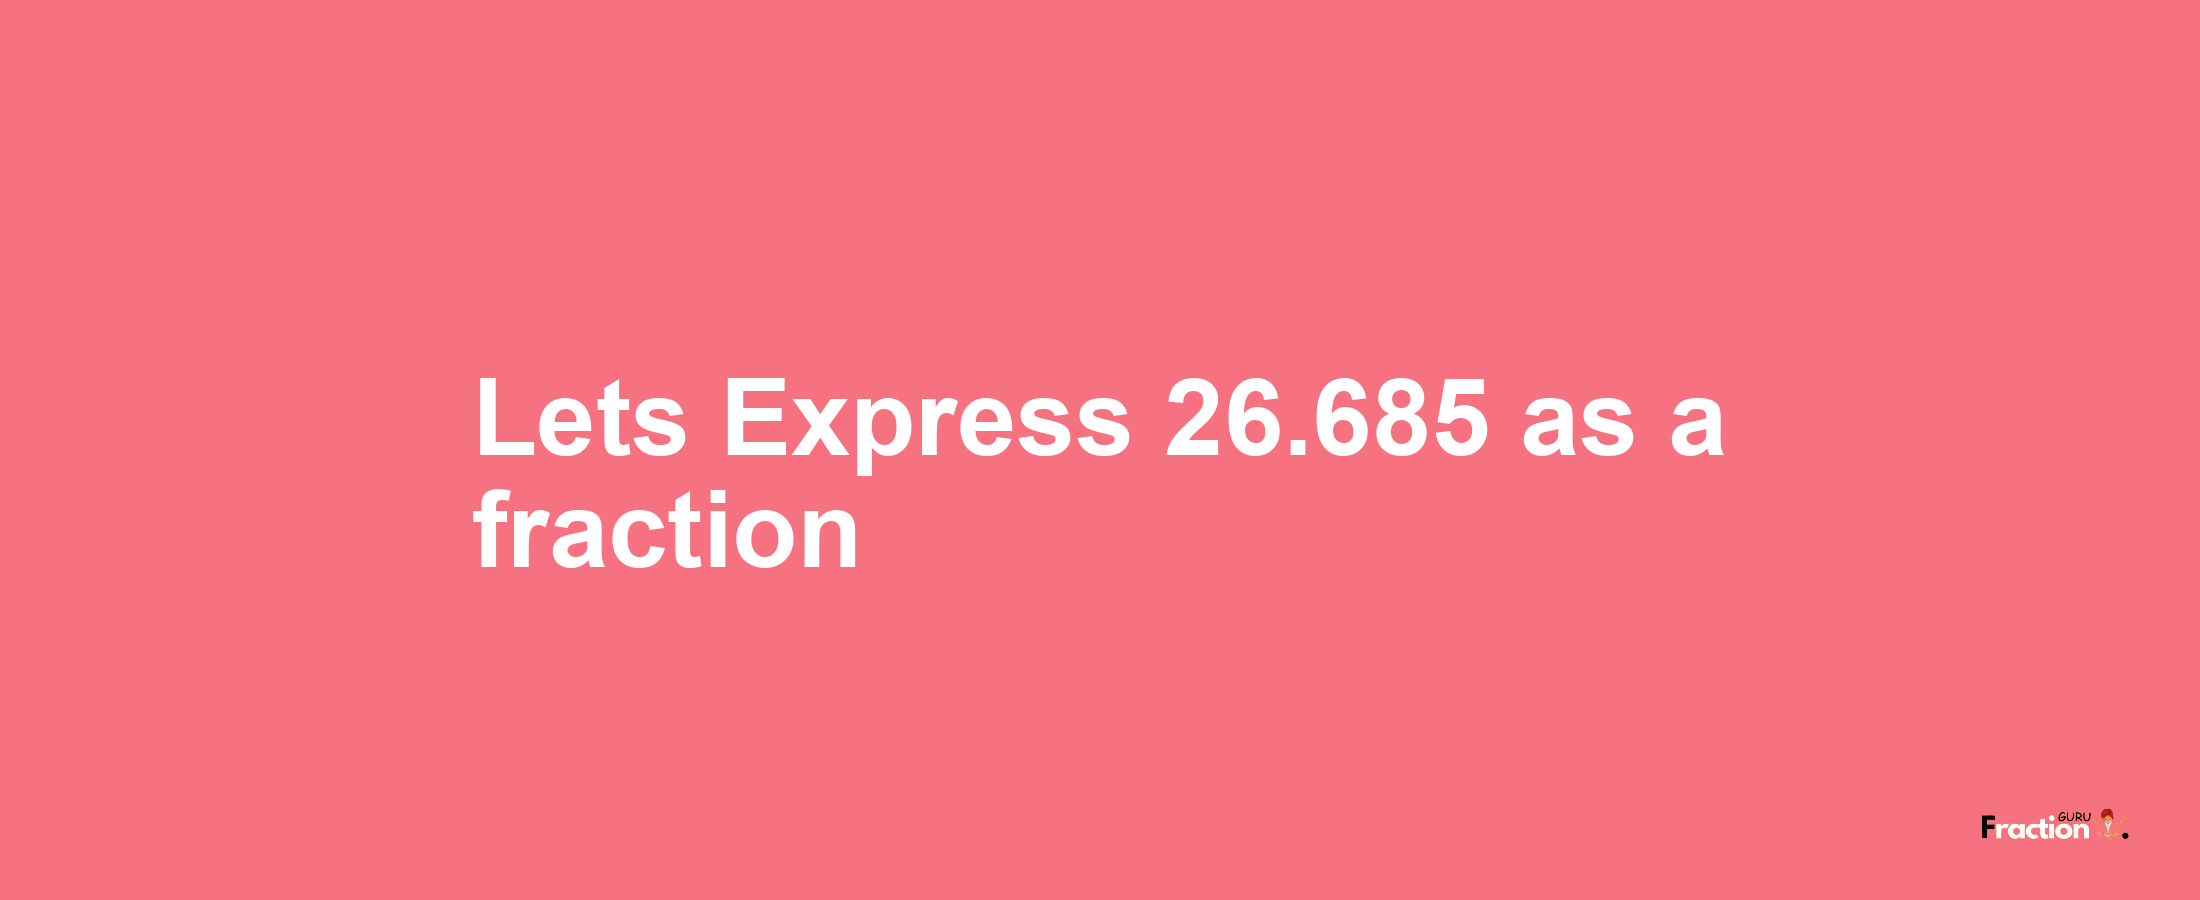 Lets Express 26.685 as afraction